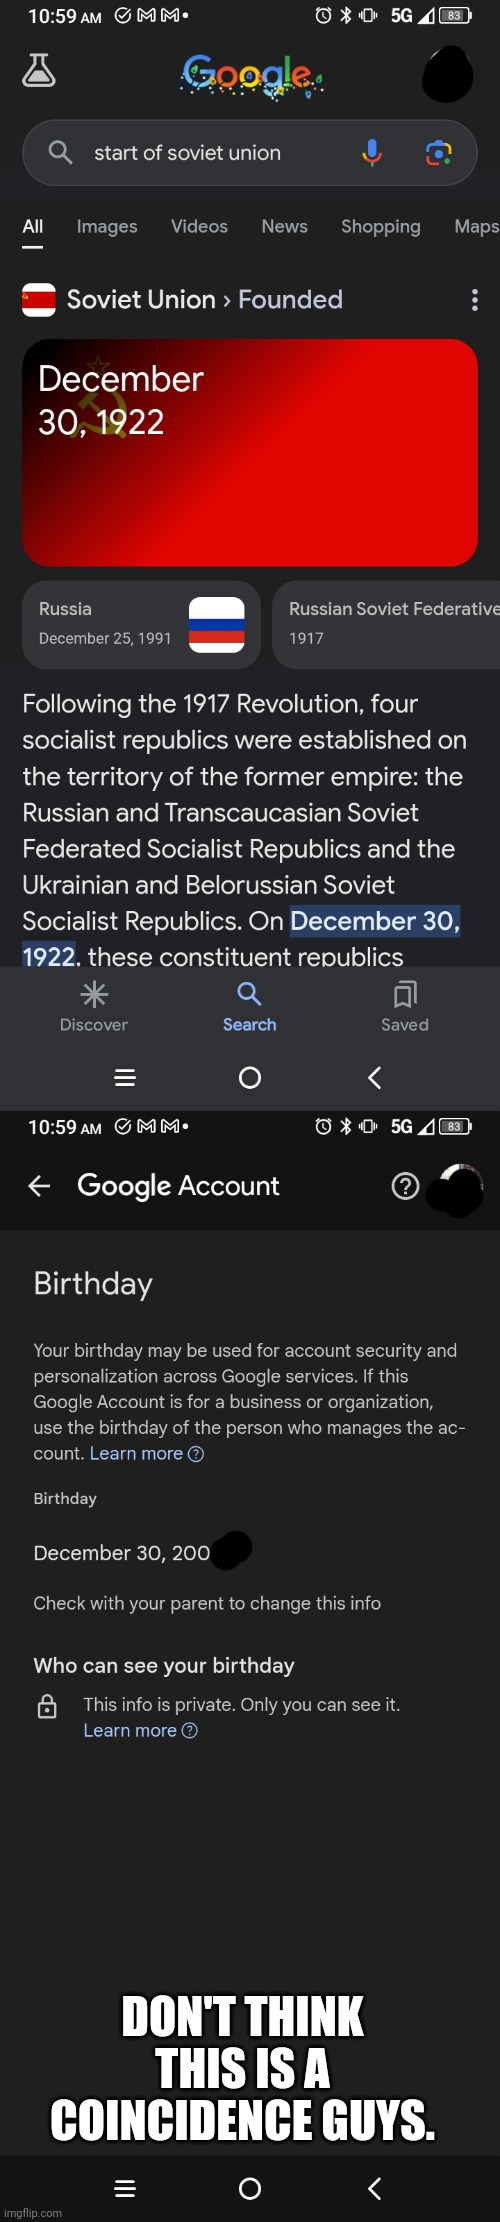 Most likely not a coincidence. | DON'T THINK THIS IS A COINCIDENCE GUYS. | image tagged in ussr,birthday,coincidence i think not,dark humor | made w/ Imgflip meme maker